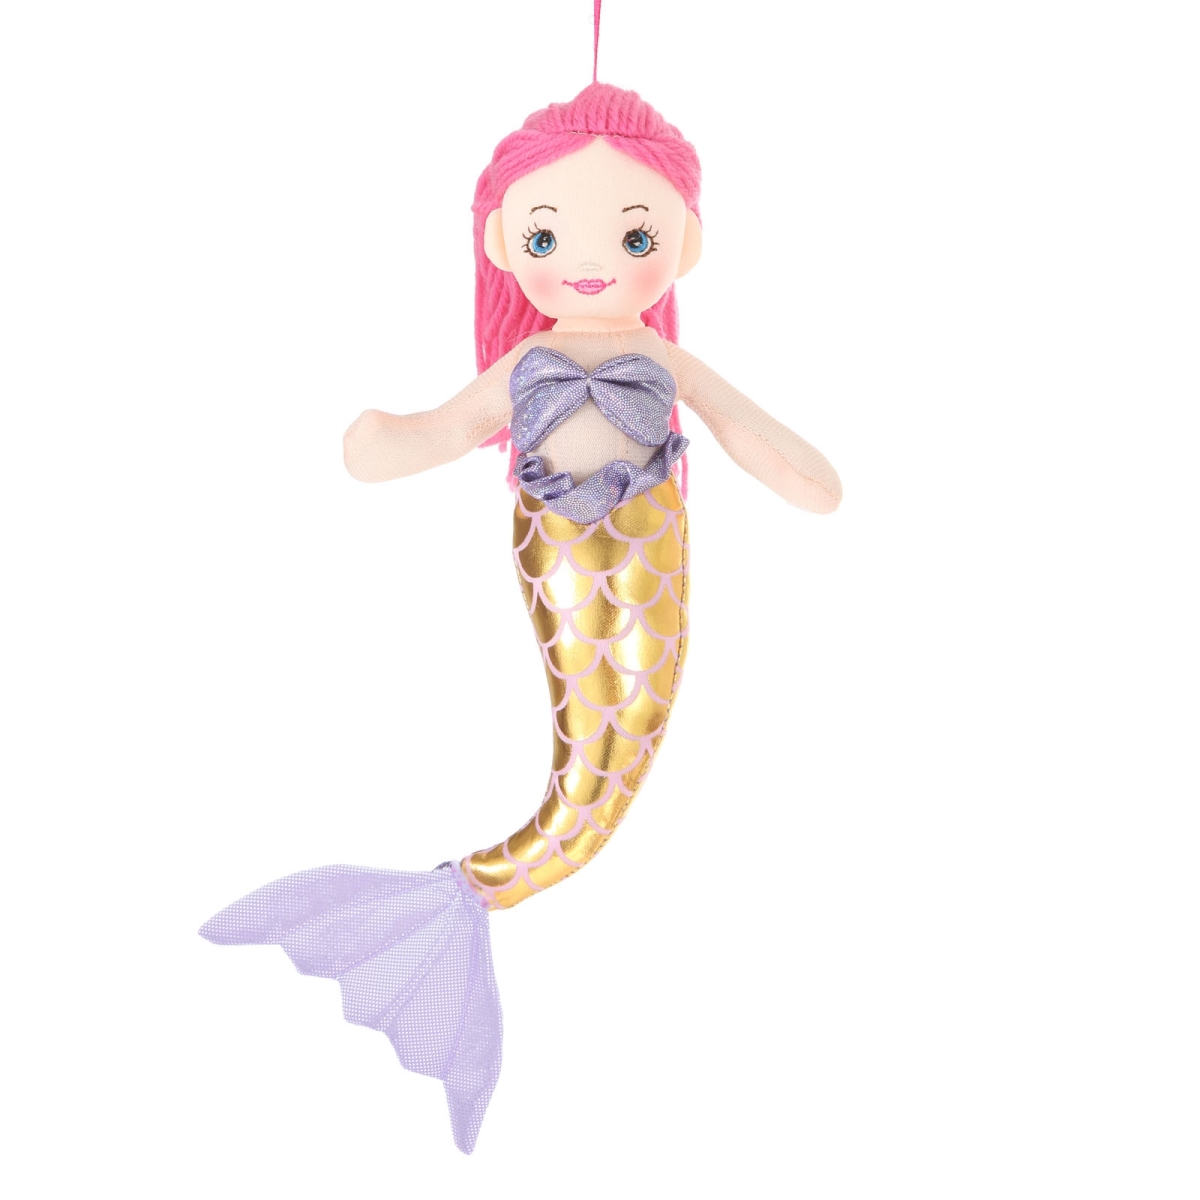 Mm02 12 In. Plush Haired Mermaid Doll - Pink